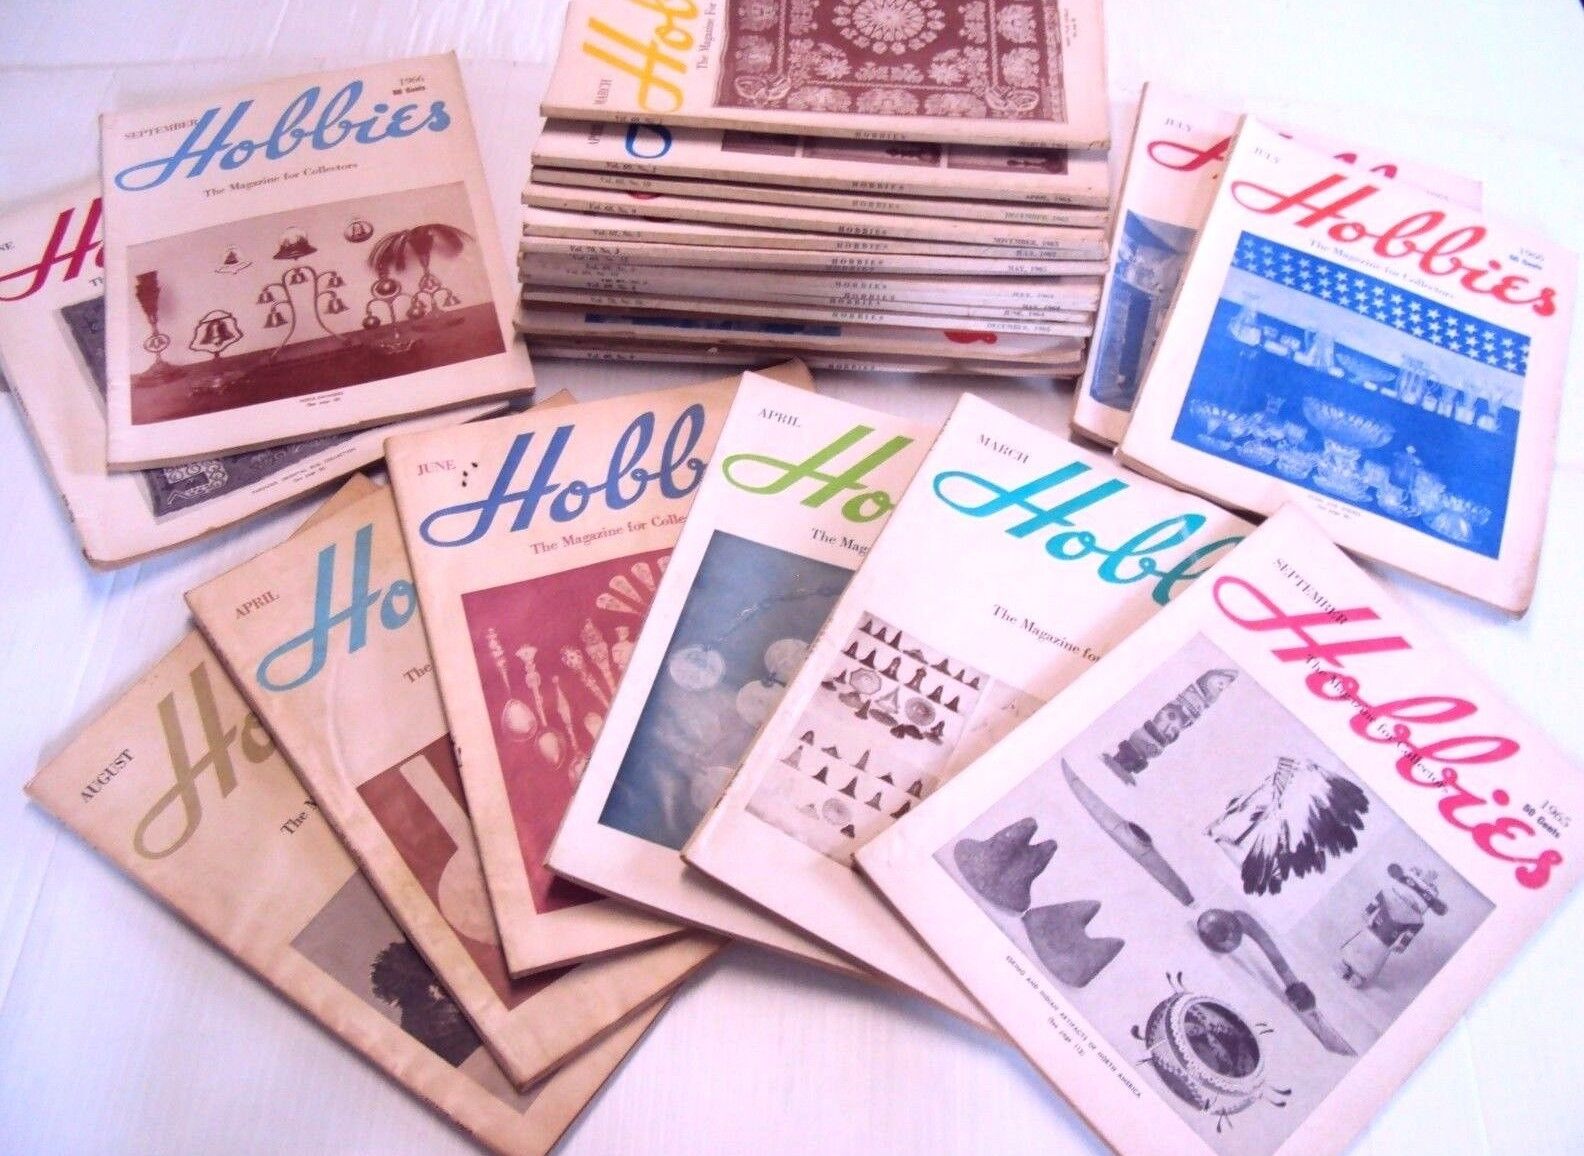 Hobbies - The Magazine For Collectors U-Pick Your Issue 1962-1969 Antique